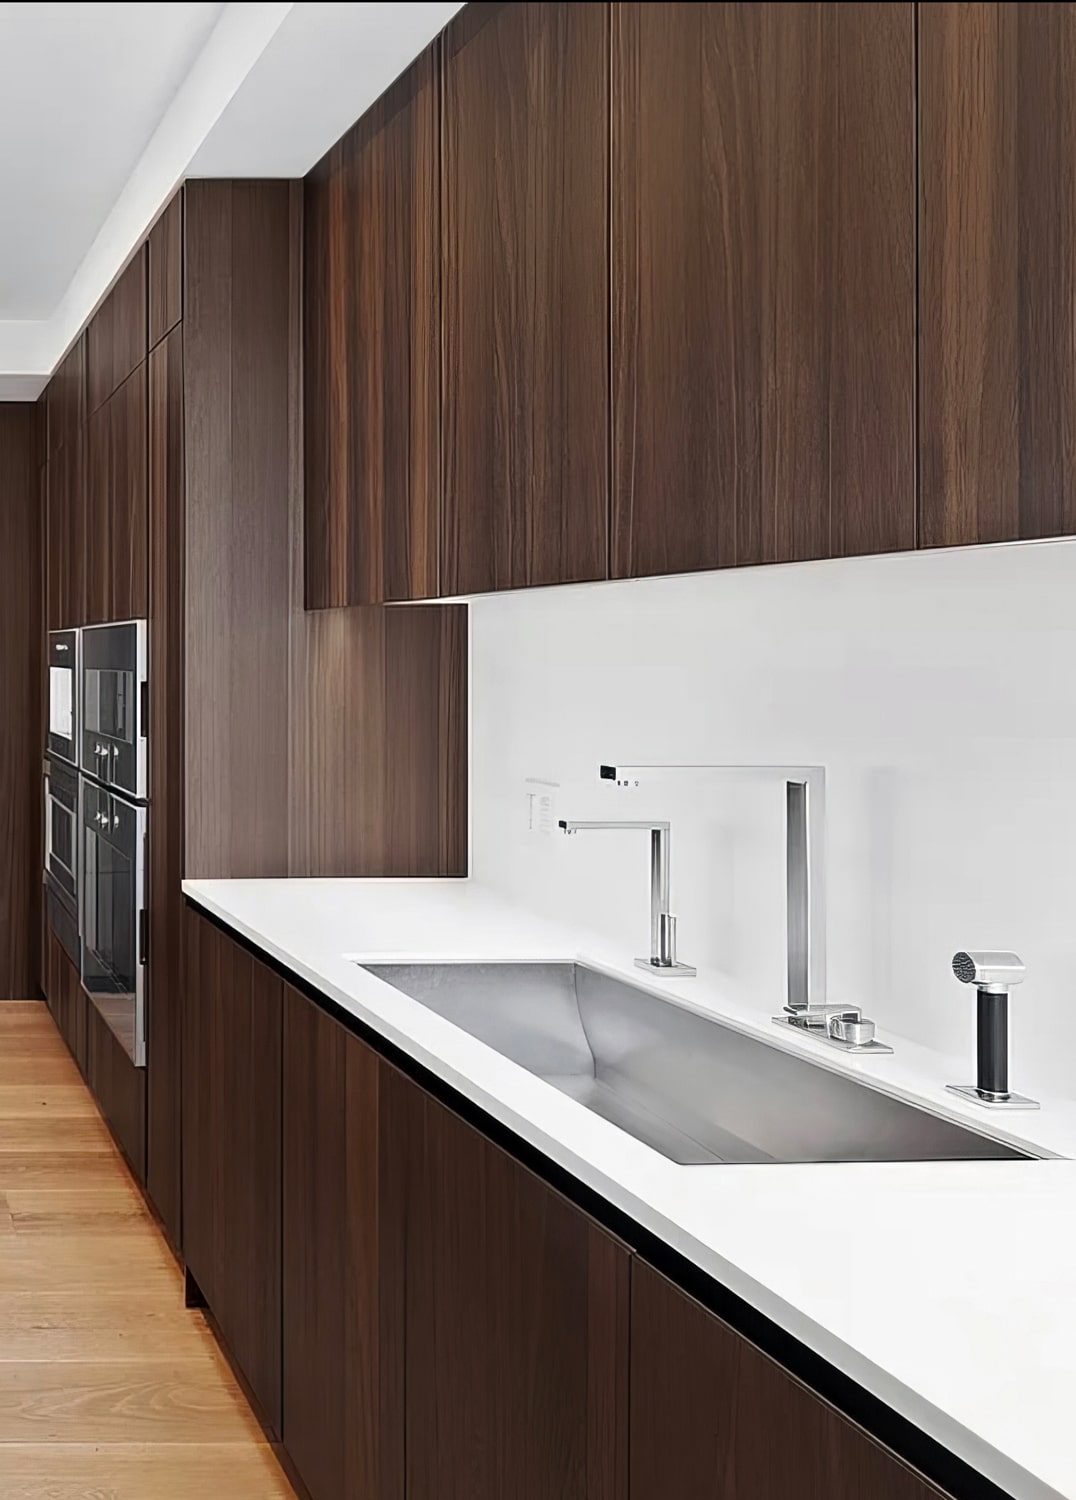 Tribeca New York Penthouse. MandiCasa YOTA Kitchen cabinetry in Thermo Oak finish. No chemicals or stains required to achieve this natural finish. Designed by Lorena Polon, Senior Design Consultant of MandiCasa New York.